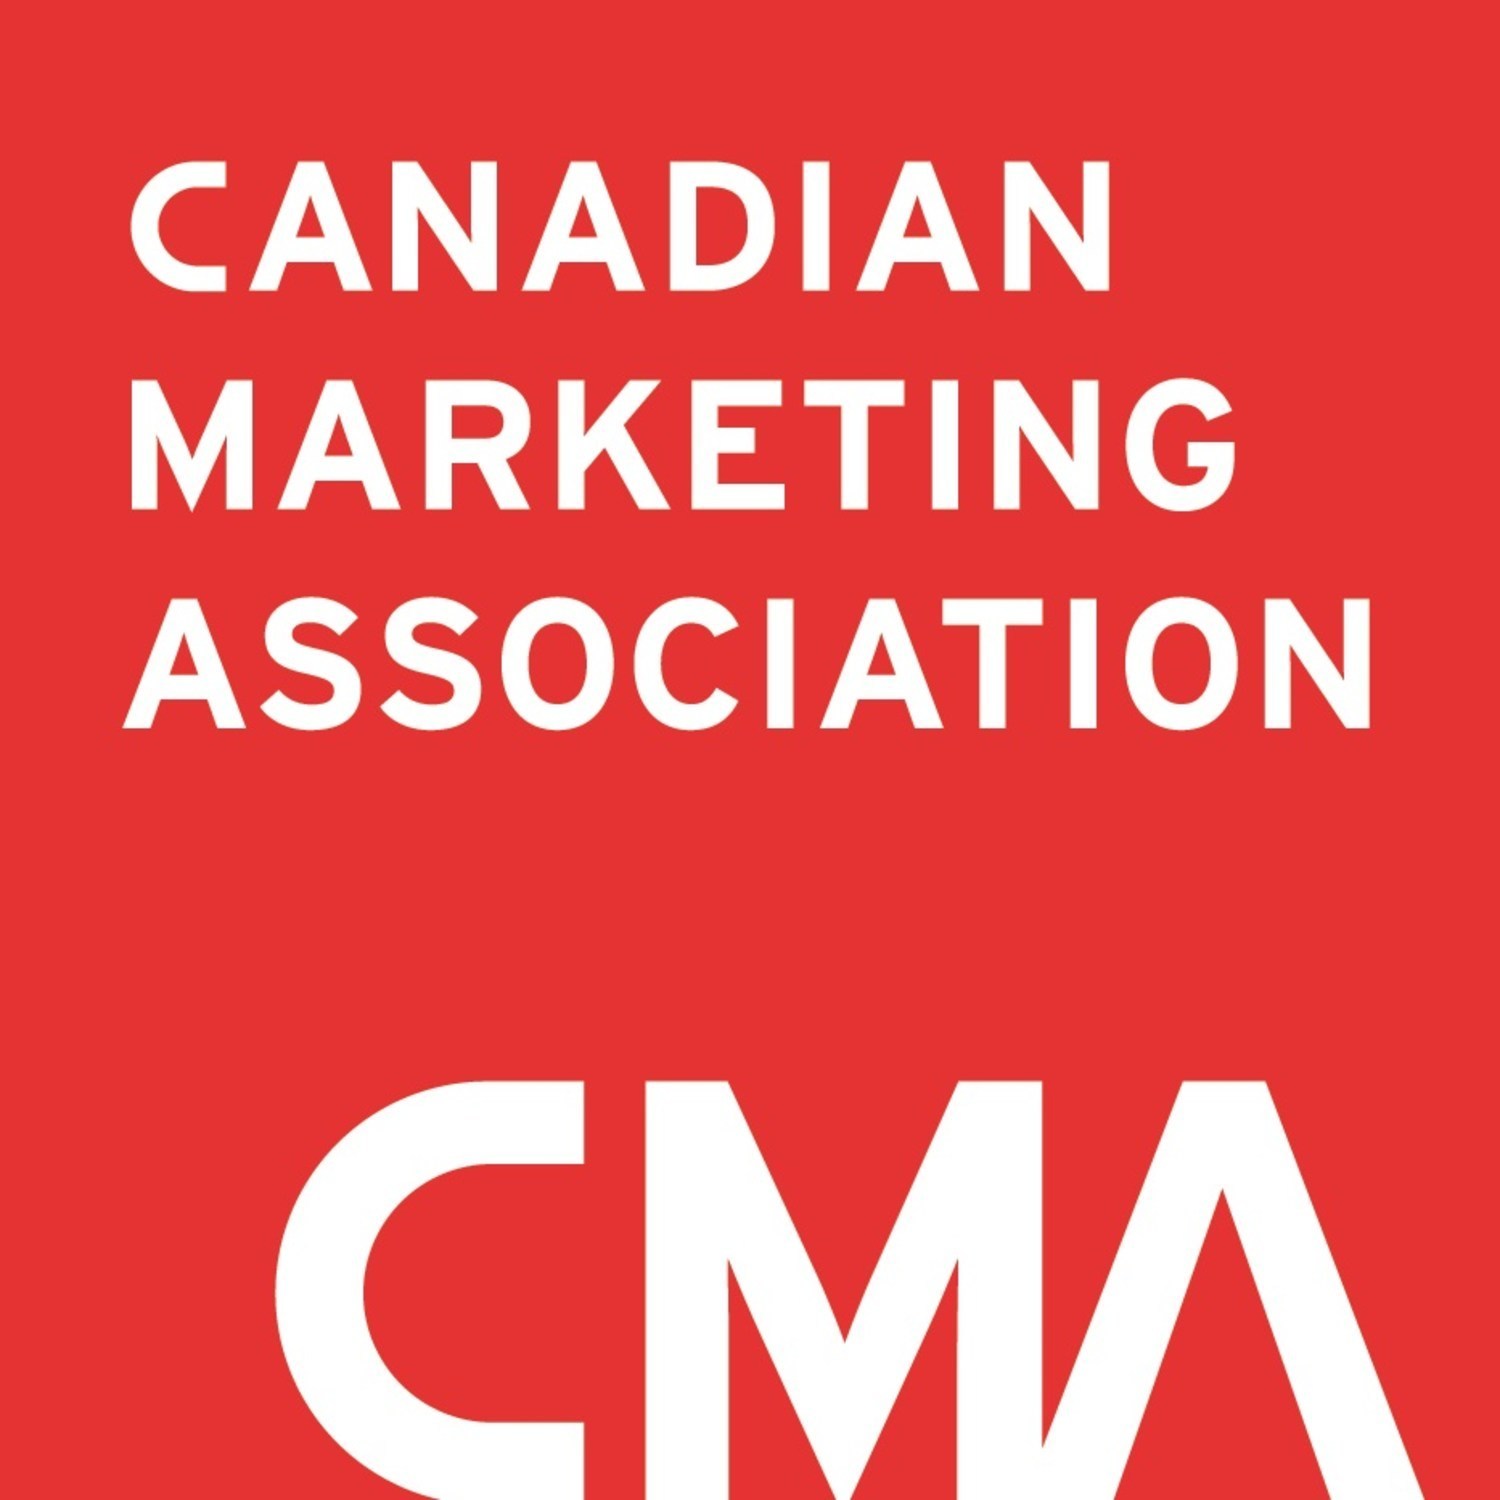 CMA Adds Agency Search Principles to its Code of Ethics ...